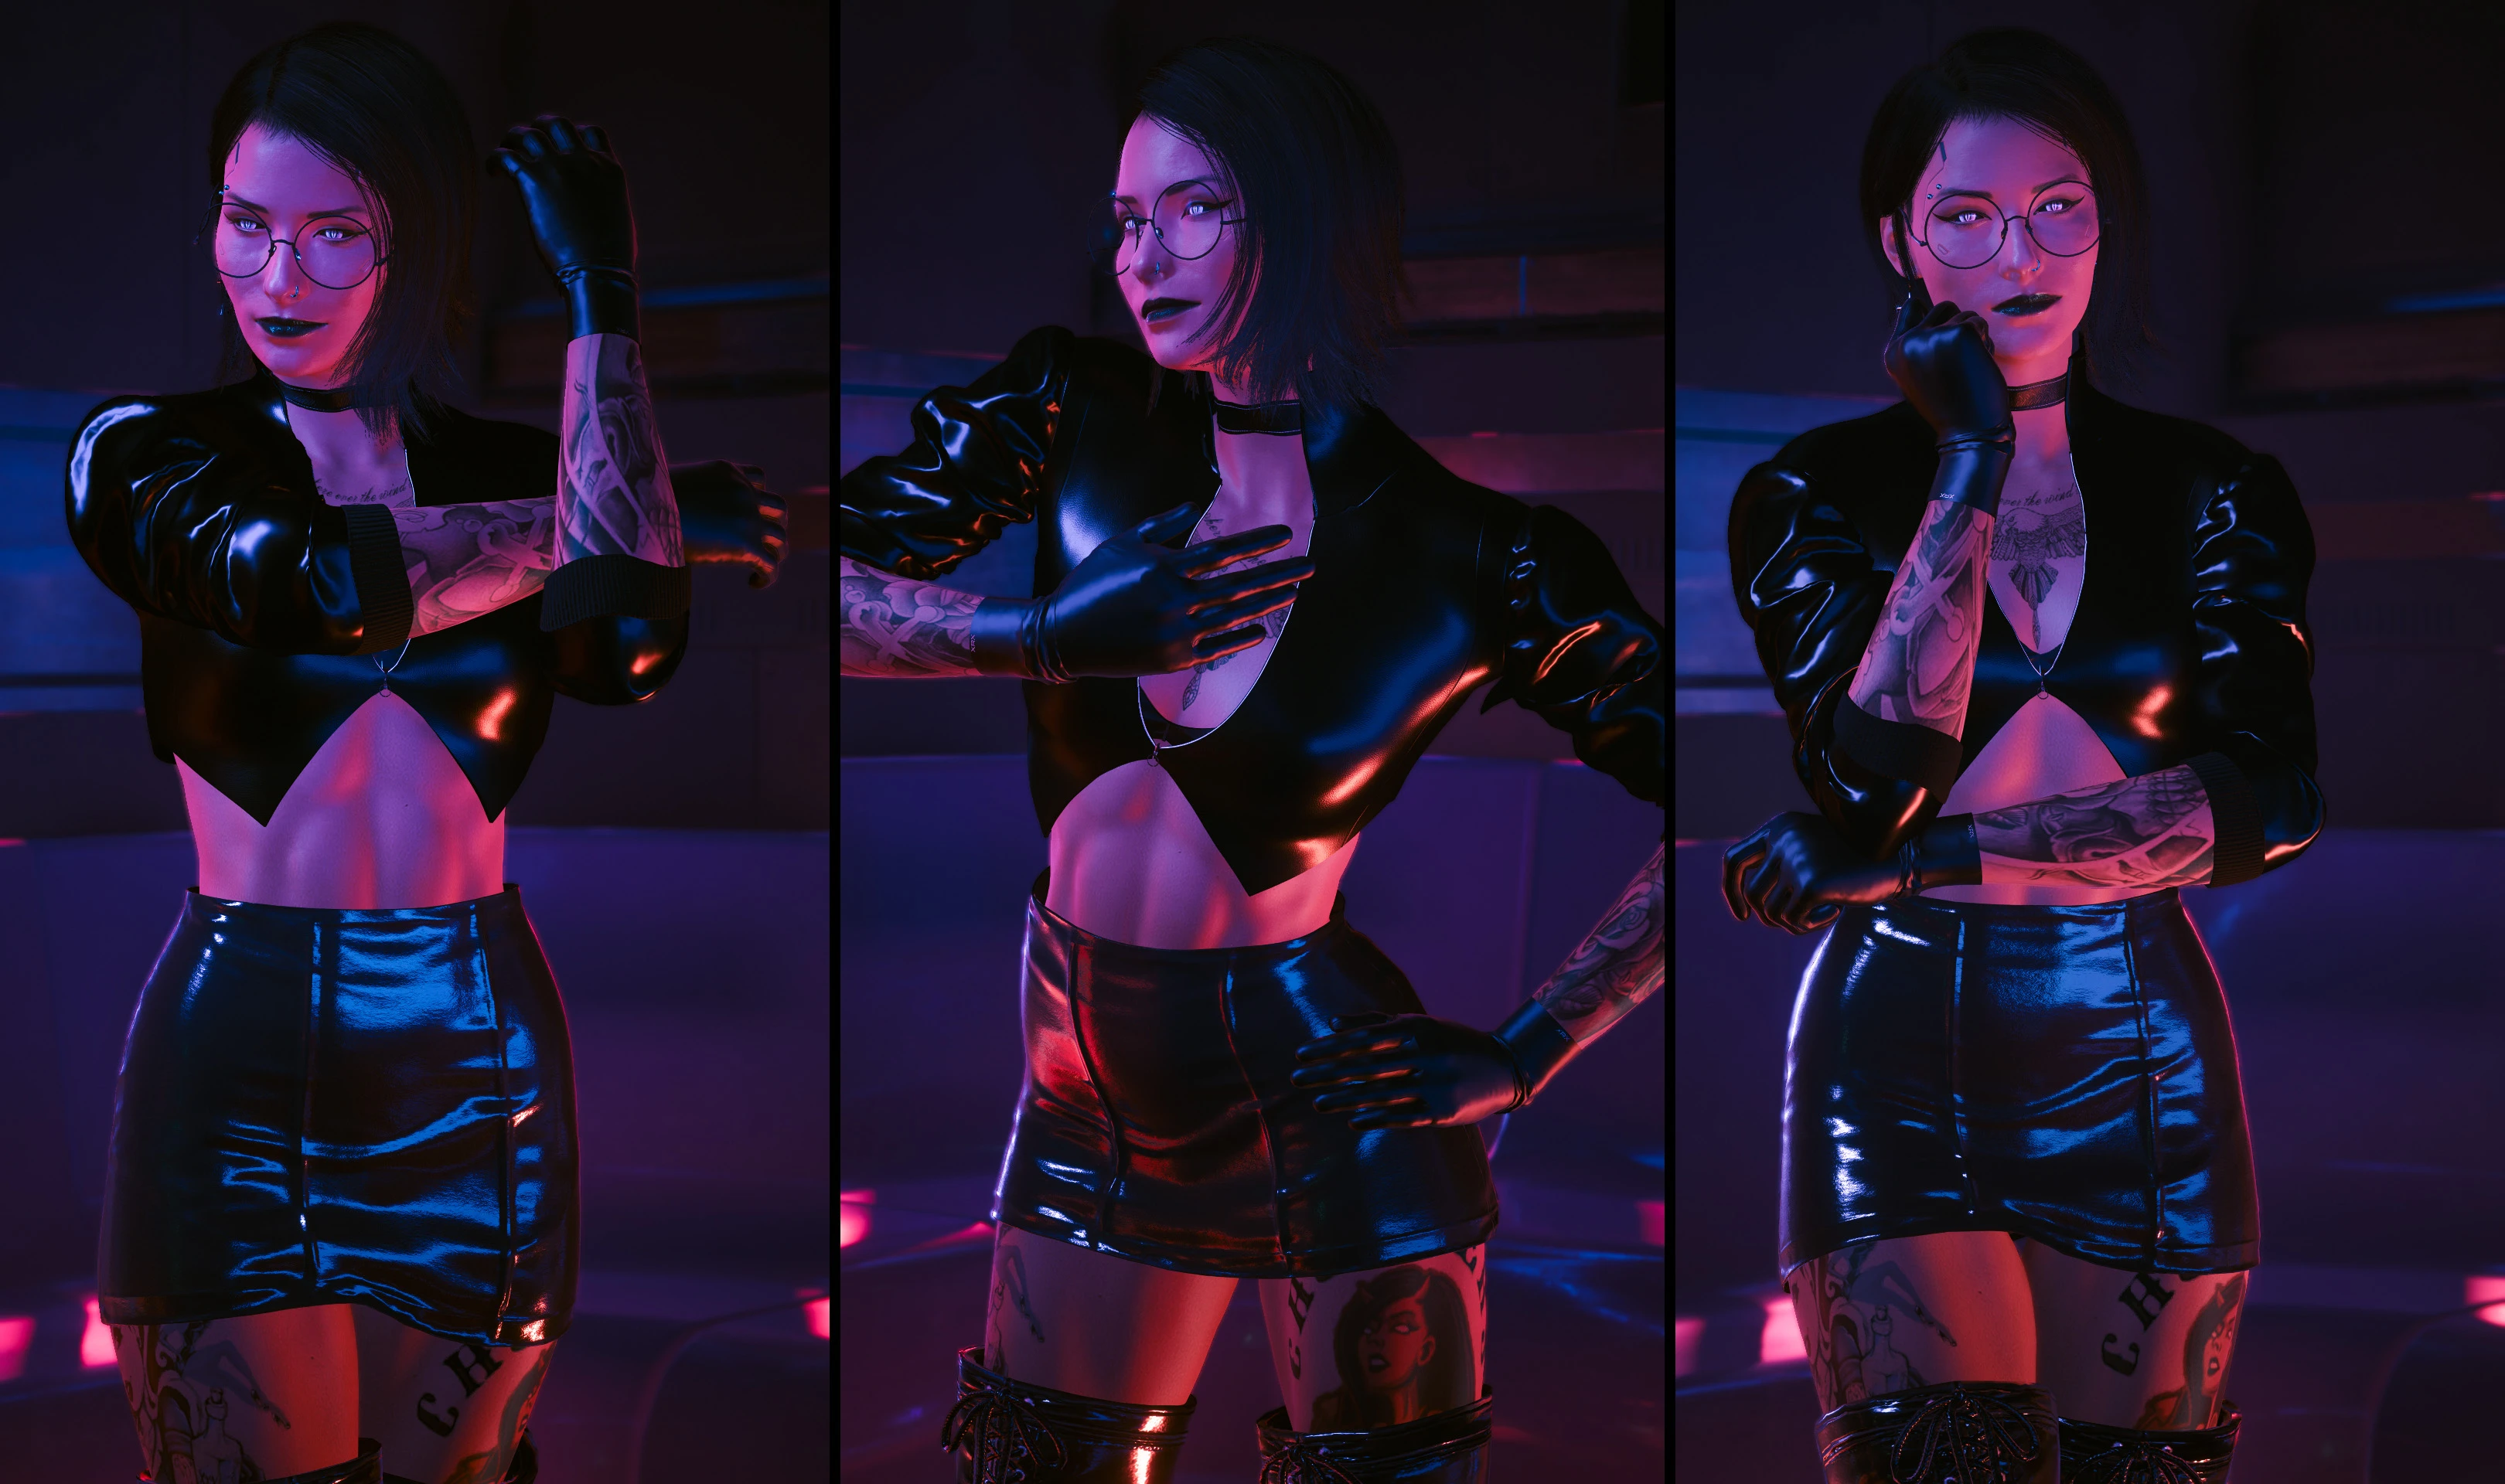 V shows off his muscles at Cyberpunk 2077 Nexus - Mods and community